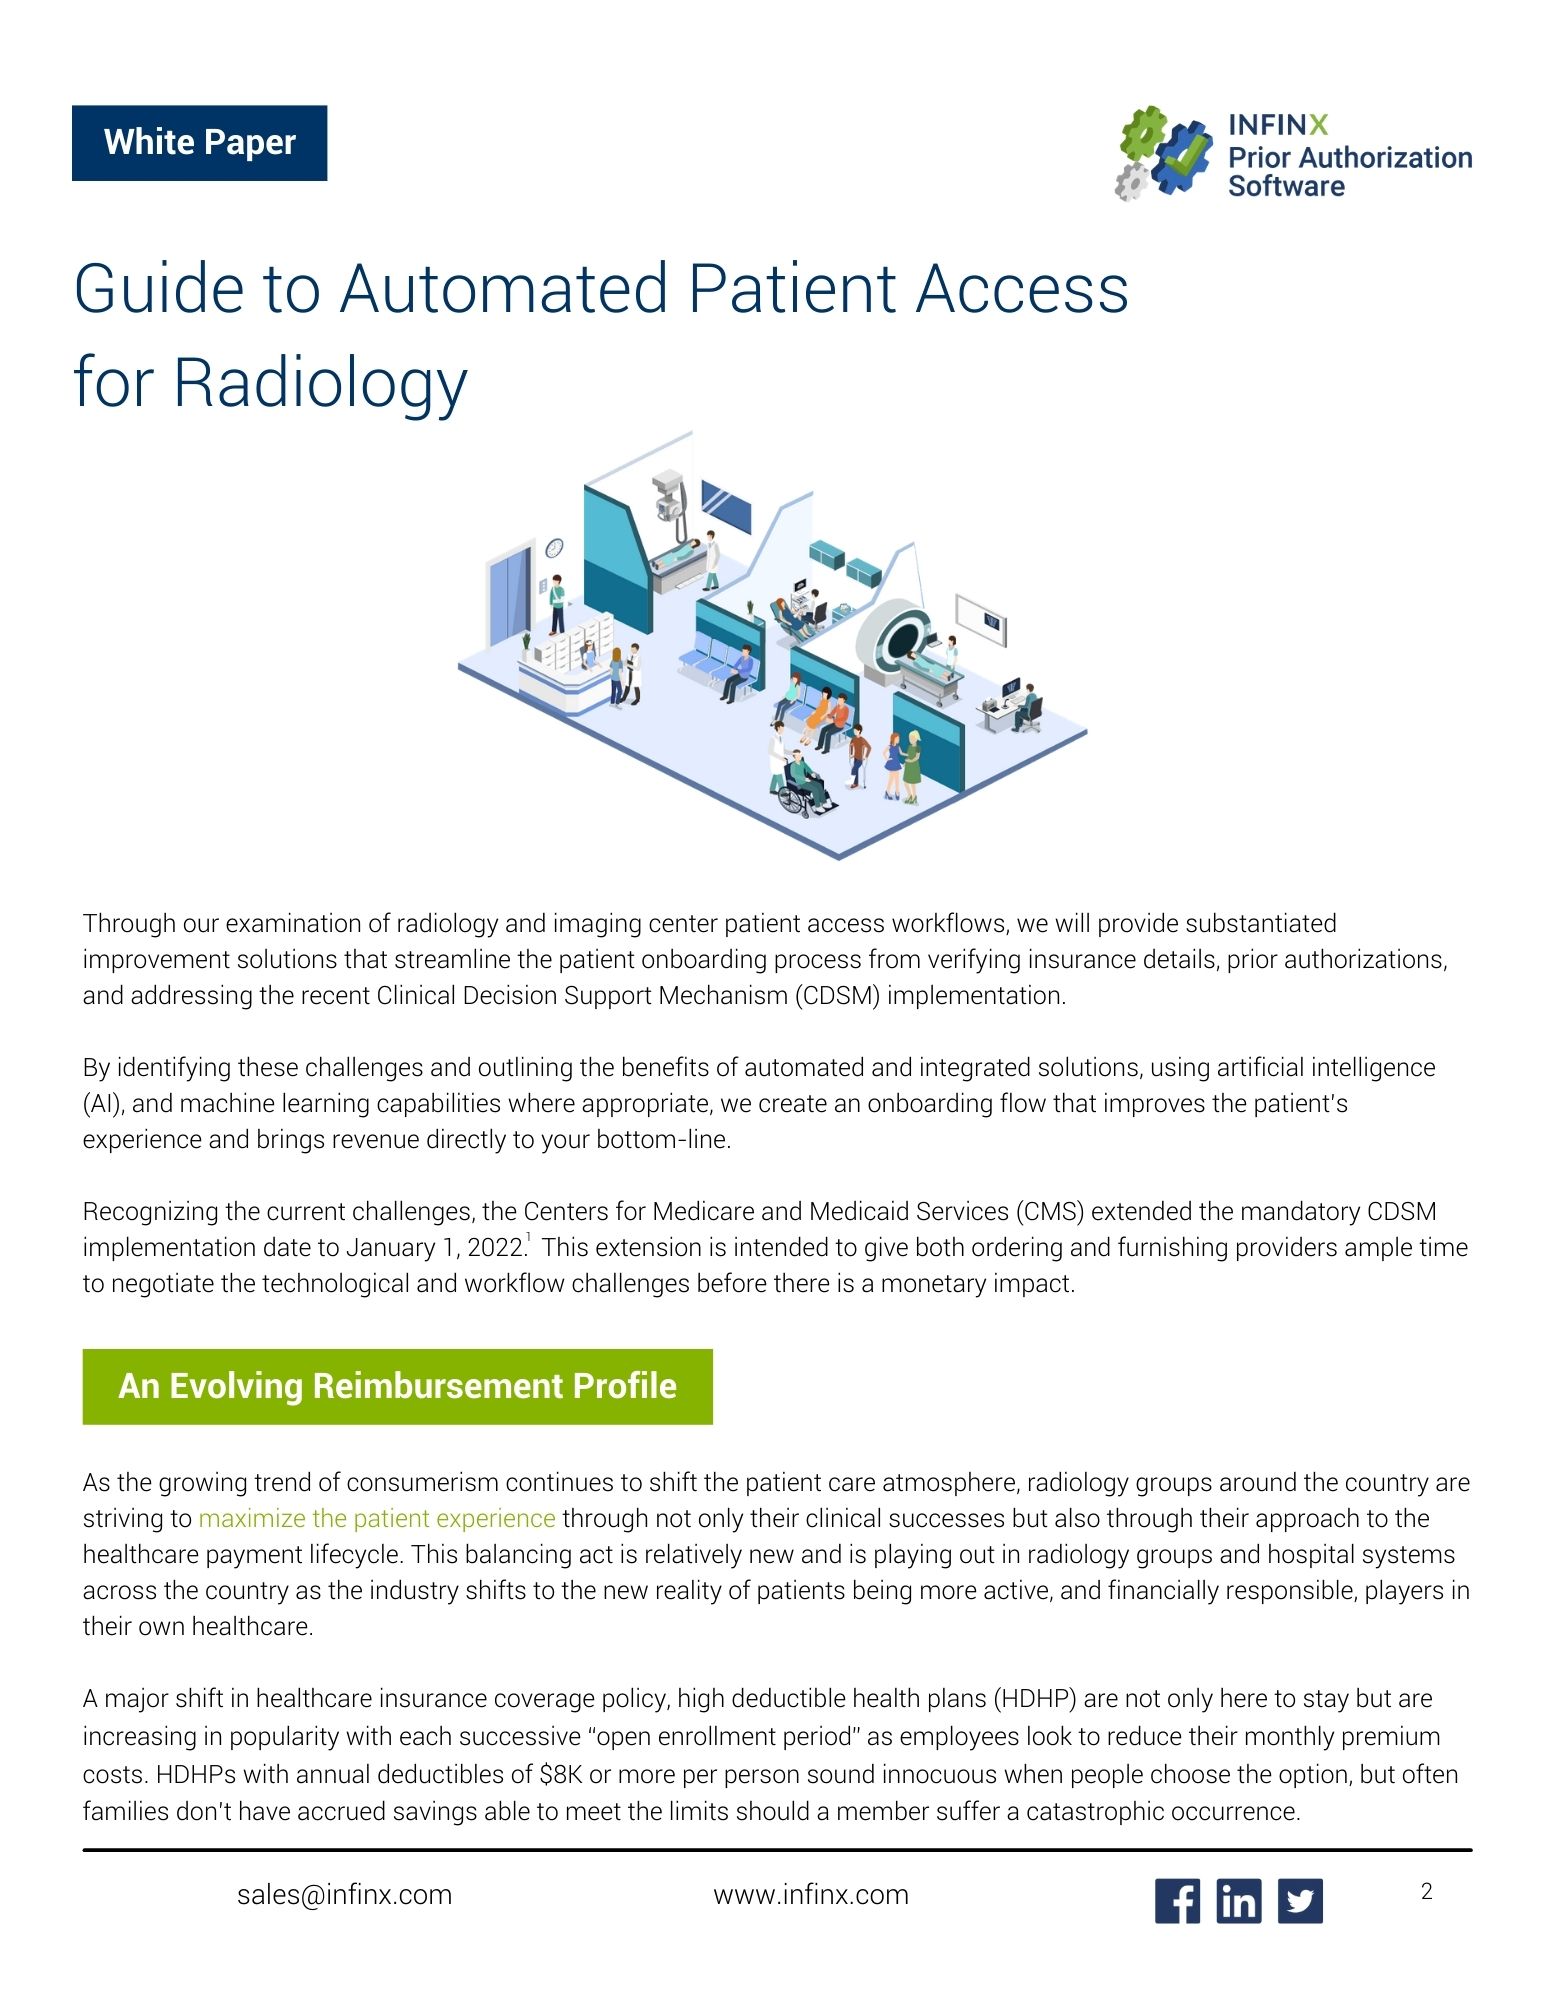 Infinx - White Paper - Guide to Automated Patient Access for Radiology - May 2021 2